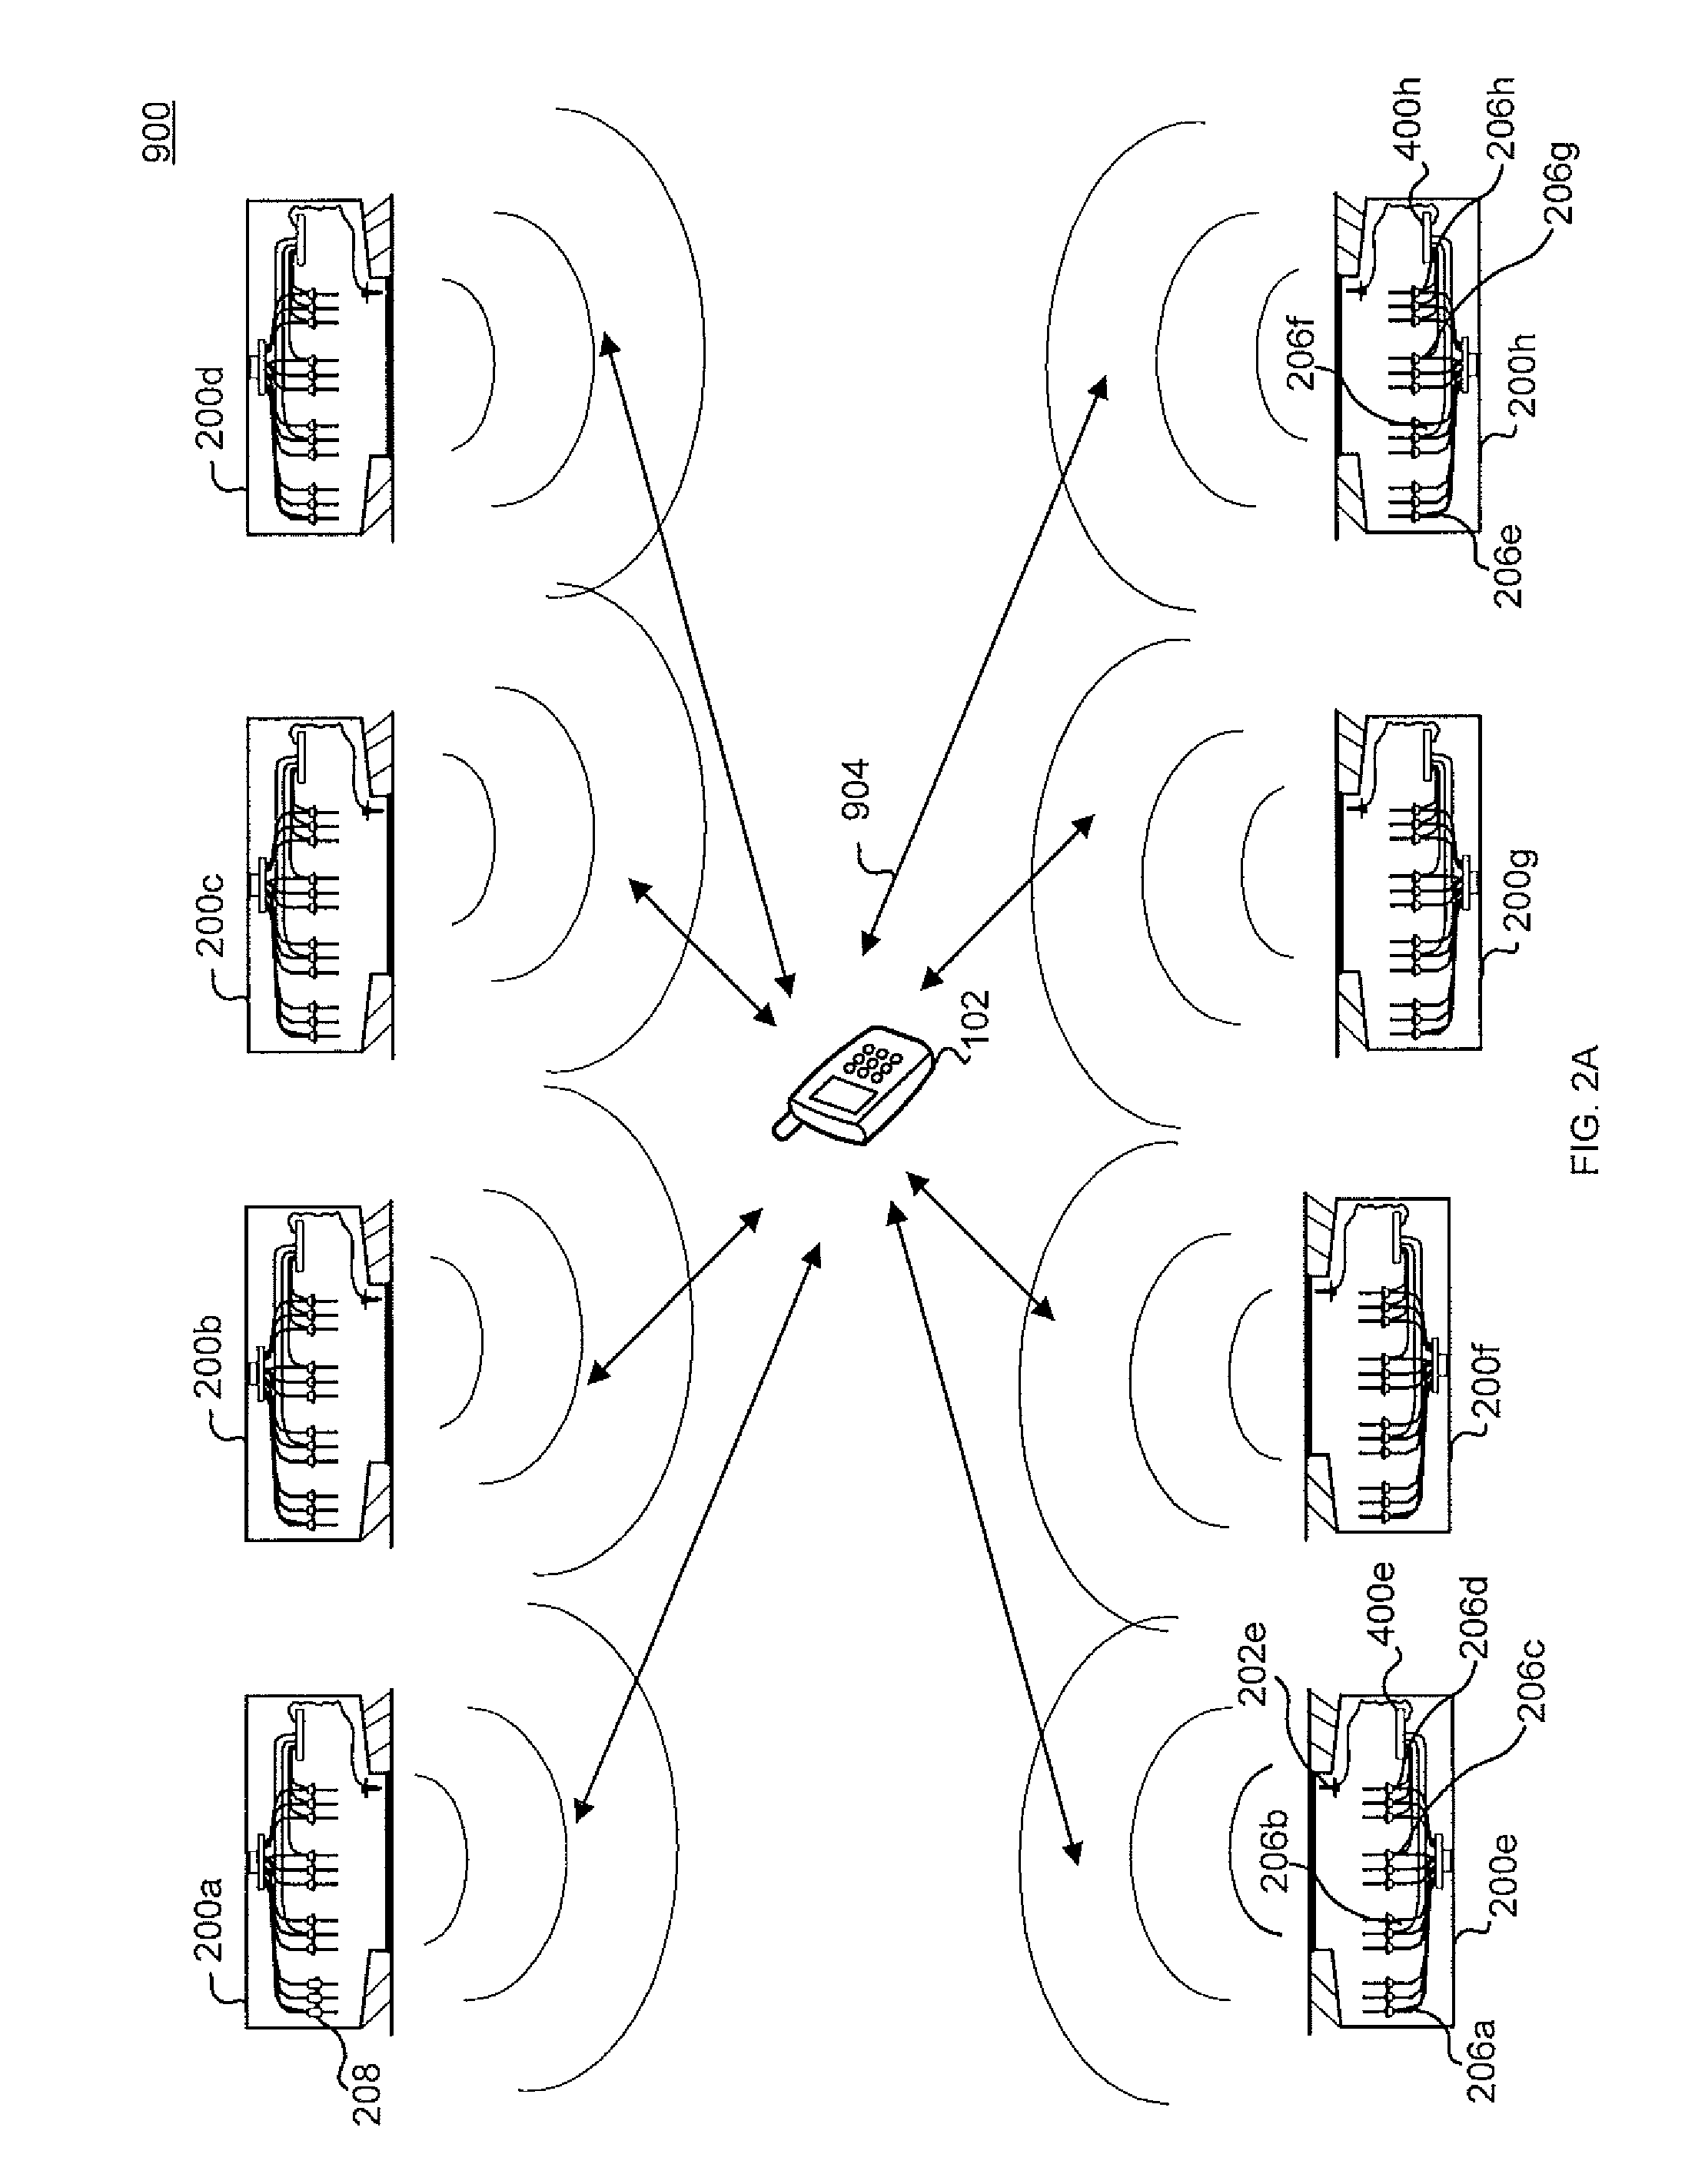 System and method for communicating power system information through a radio frequency device